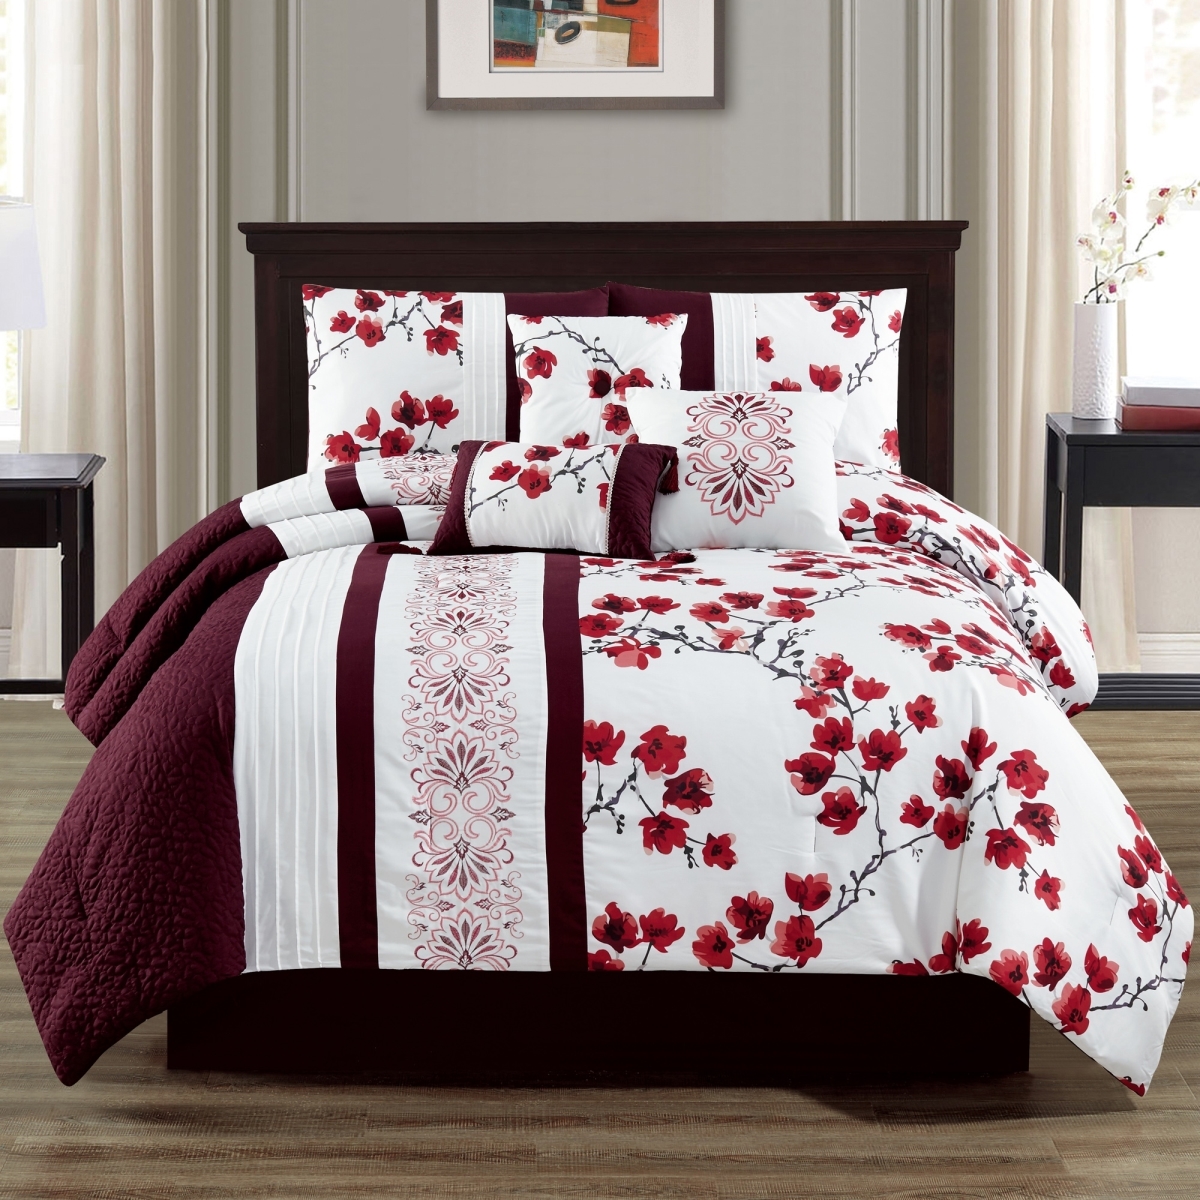 21177k Camilla Embroidery 7 Piece Comforter Set, King